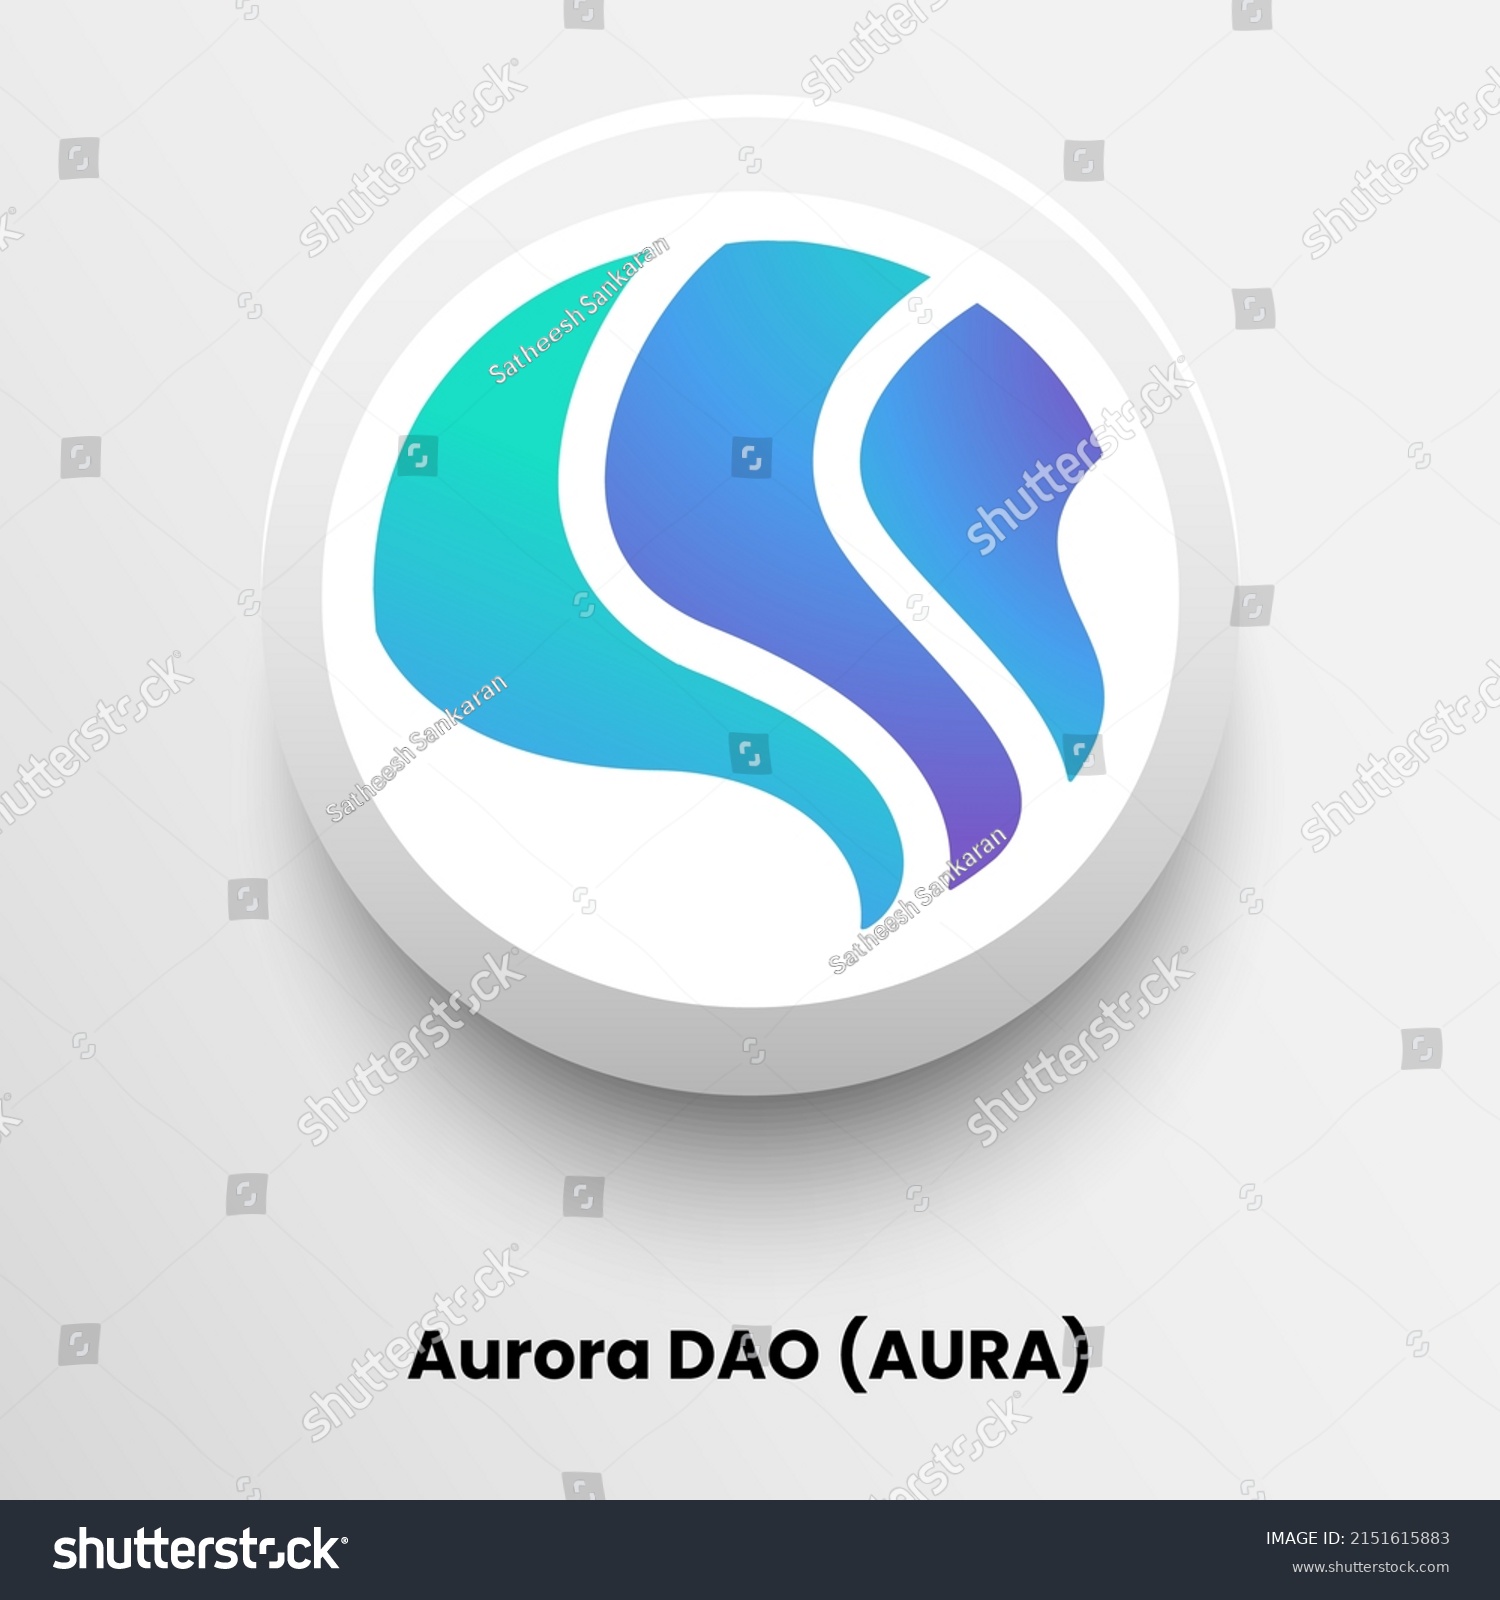 SVG of Creative block chain based crypto currency Aurora DAO (AURA) logo vector illustration design. Can be used as icon, badge, label, symbol, sticker and print background template svg